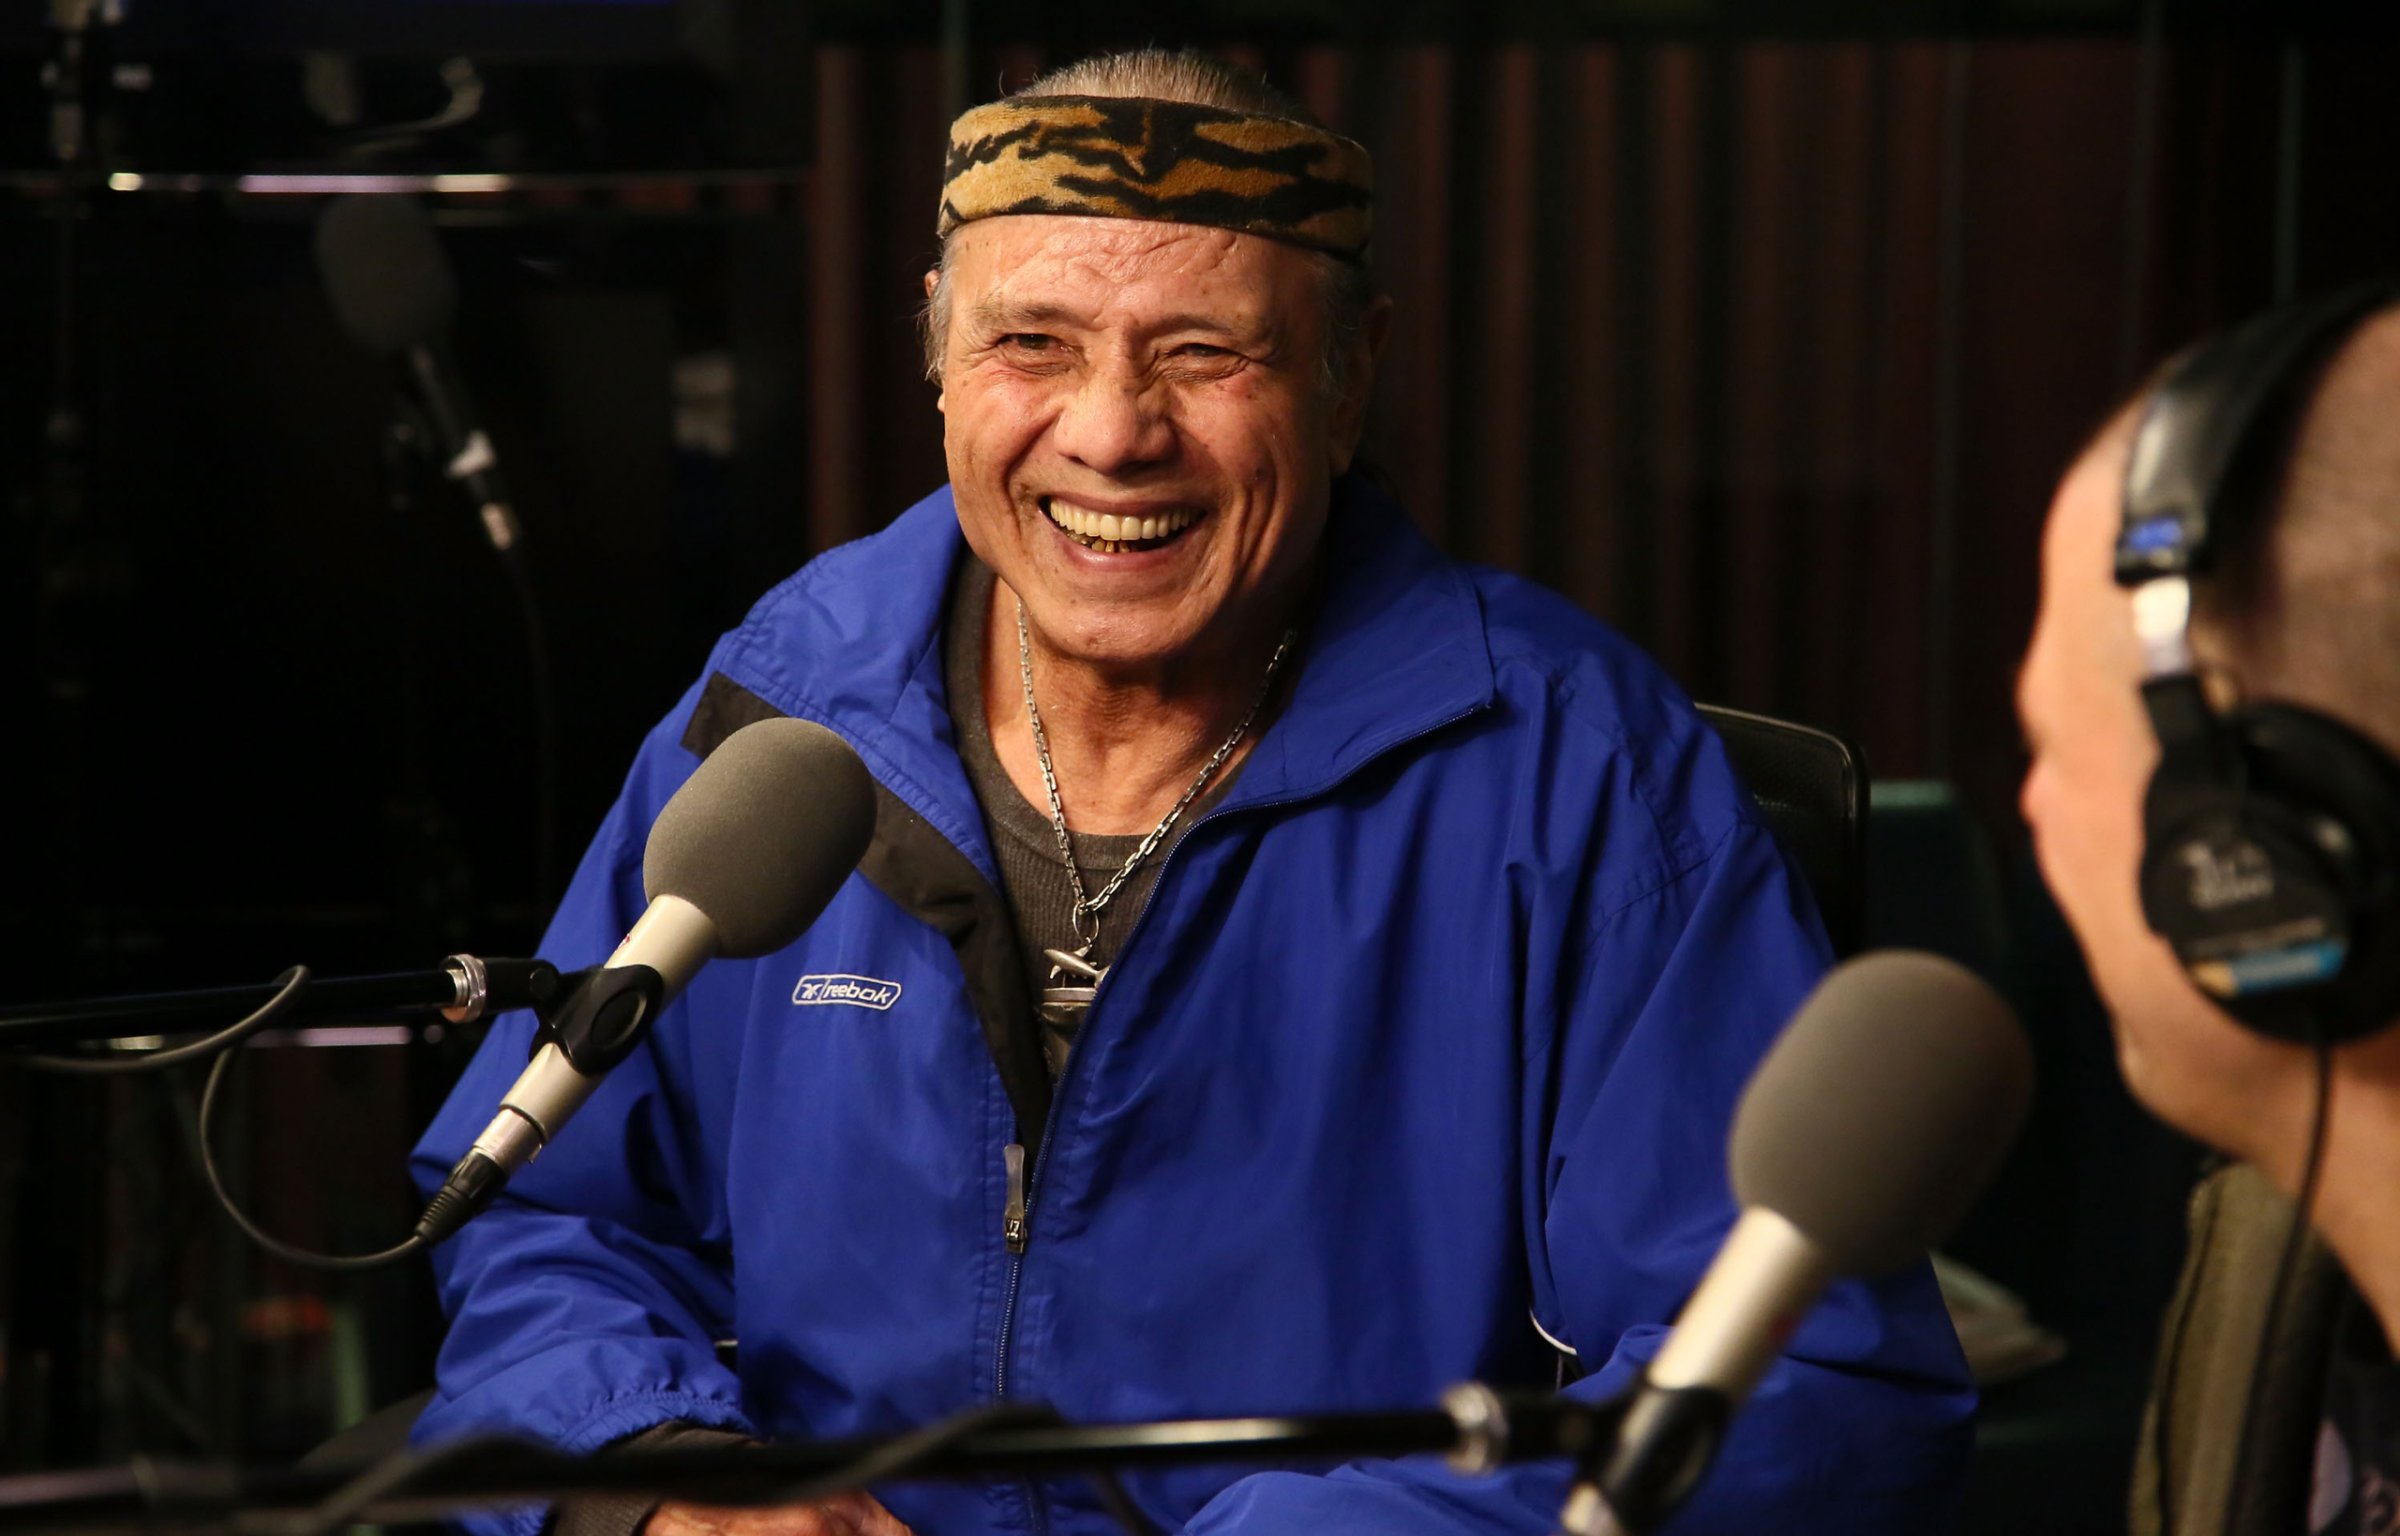 NEW YORK, NY - JANUARY 09: Jimmy "Superfly" Snuka visits "The Opie &amp; Anthony Show" at SiriusXM studios on January 9, 2013 in New York City. (Photo by Astrid Stawiarz/Getty Images)